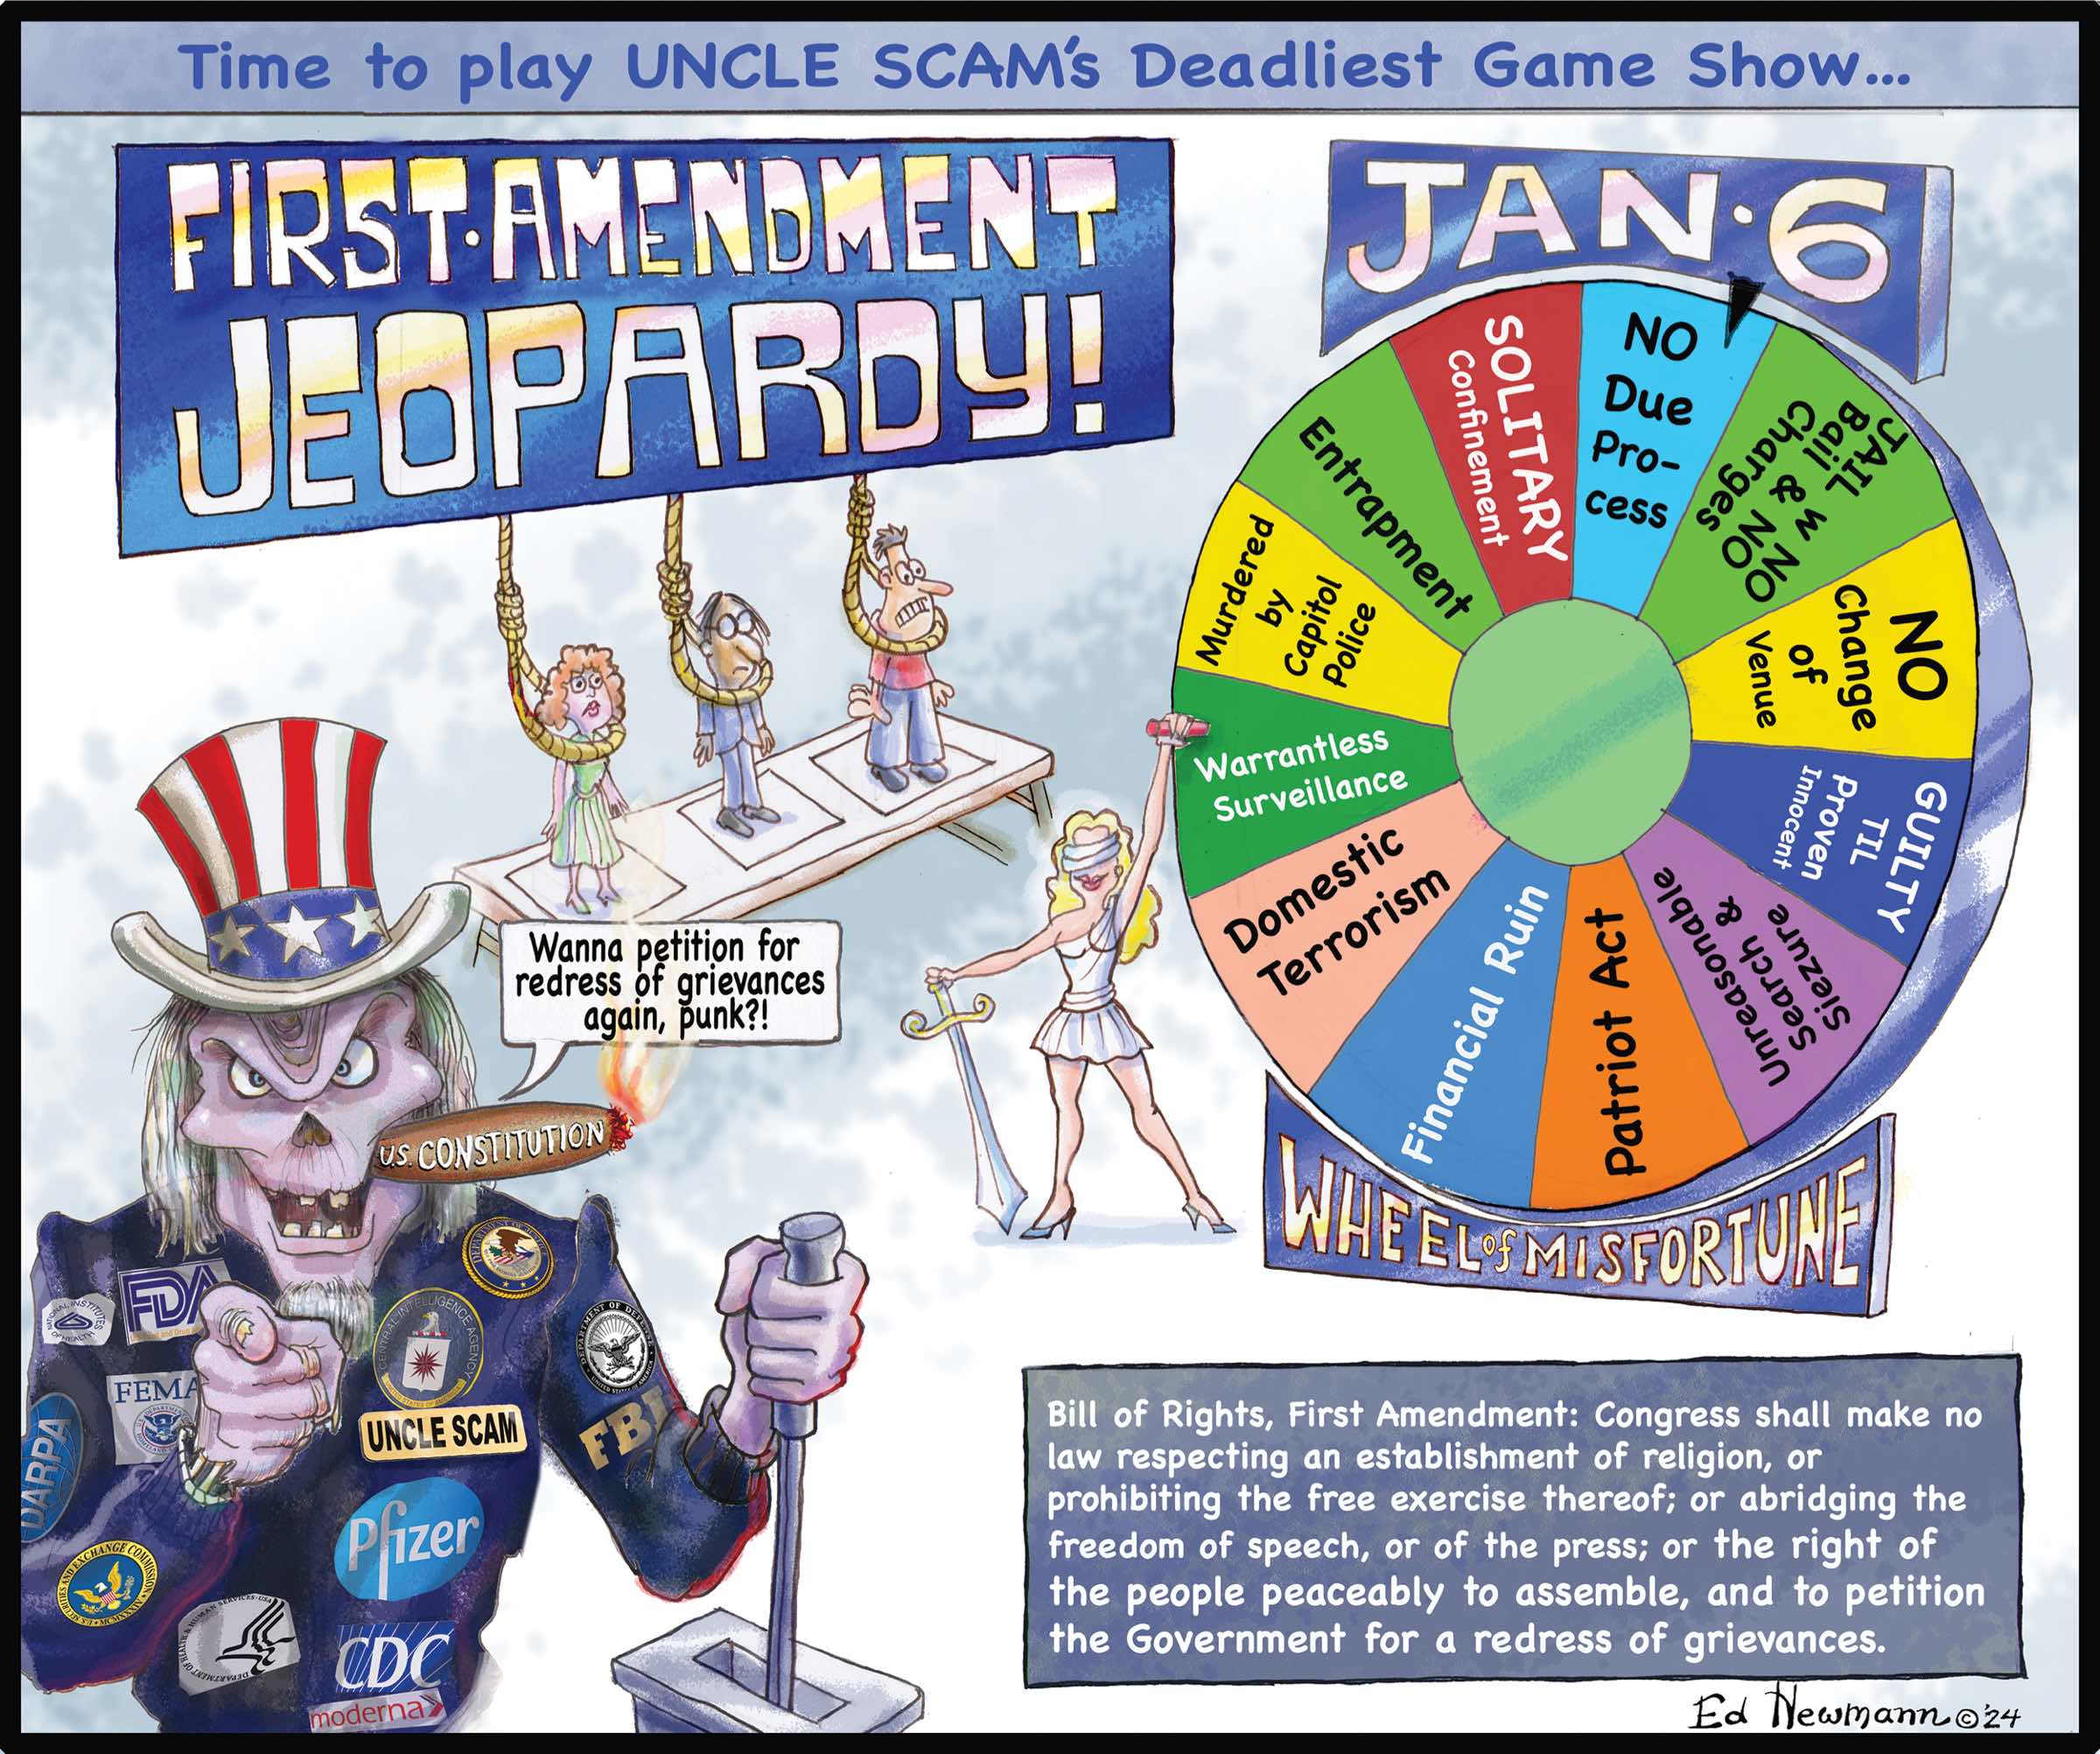 Uncle Scam's First Amendment Jeopardy J6 Wheel of Misfortune Cartoon by Ed Newmann Jan 2024